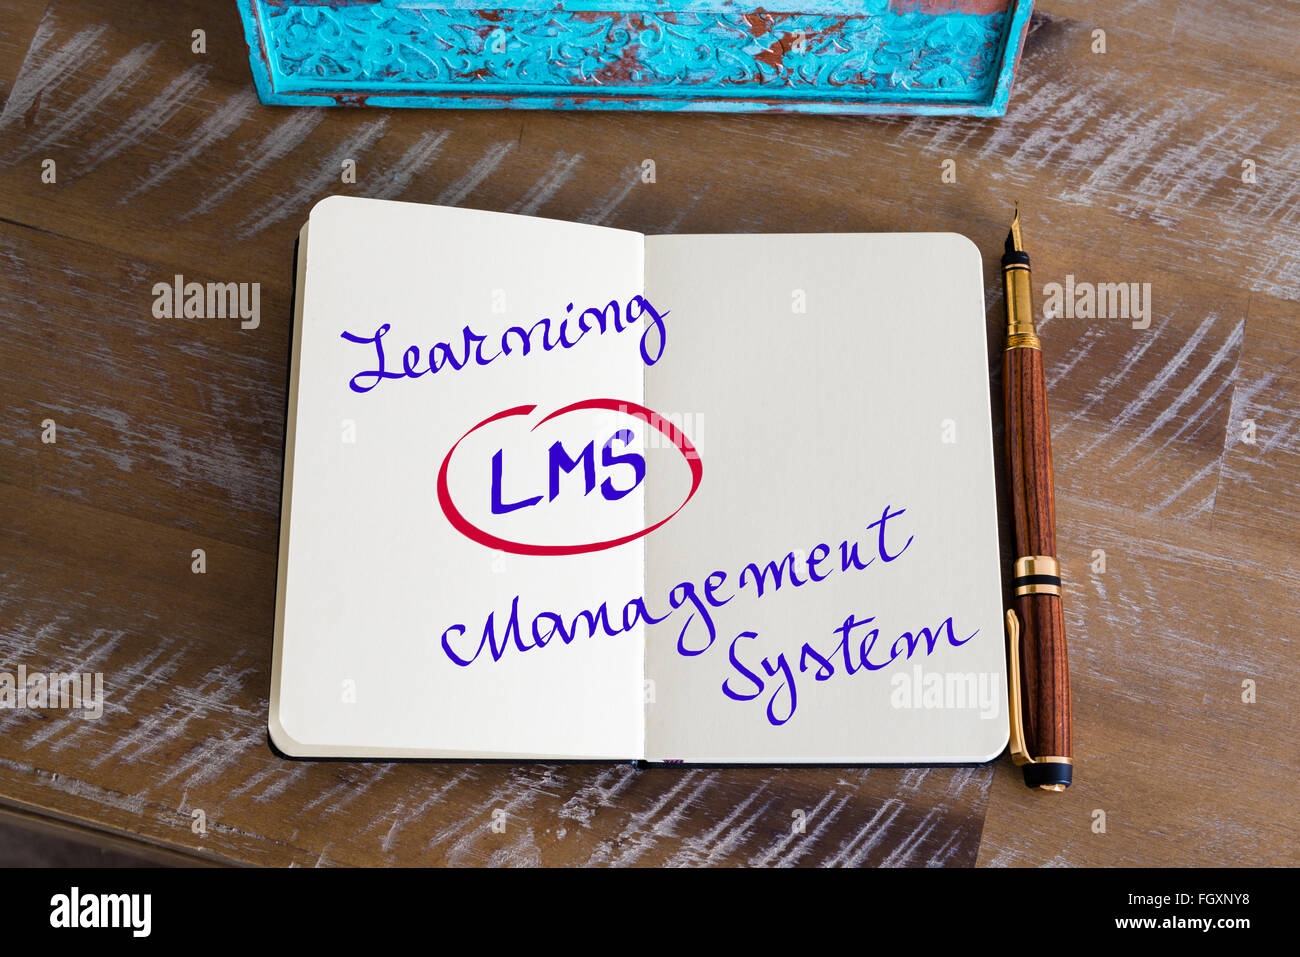 Business acronym LMS LEARNING MANAGEMENT SYSTEM with handwritten text Stock Photo